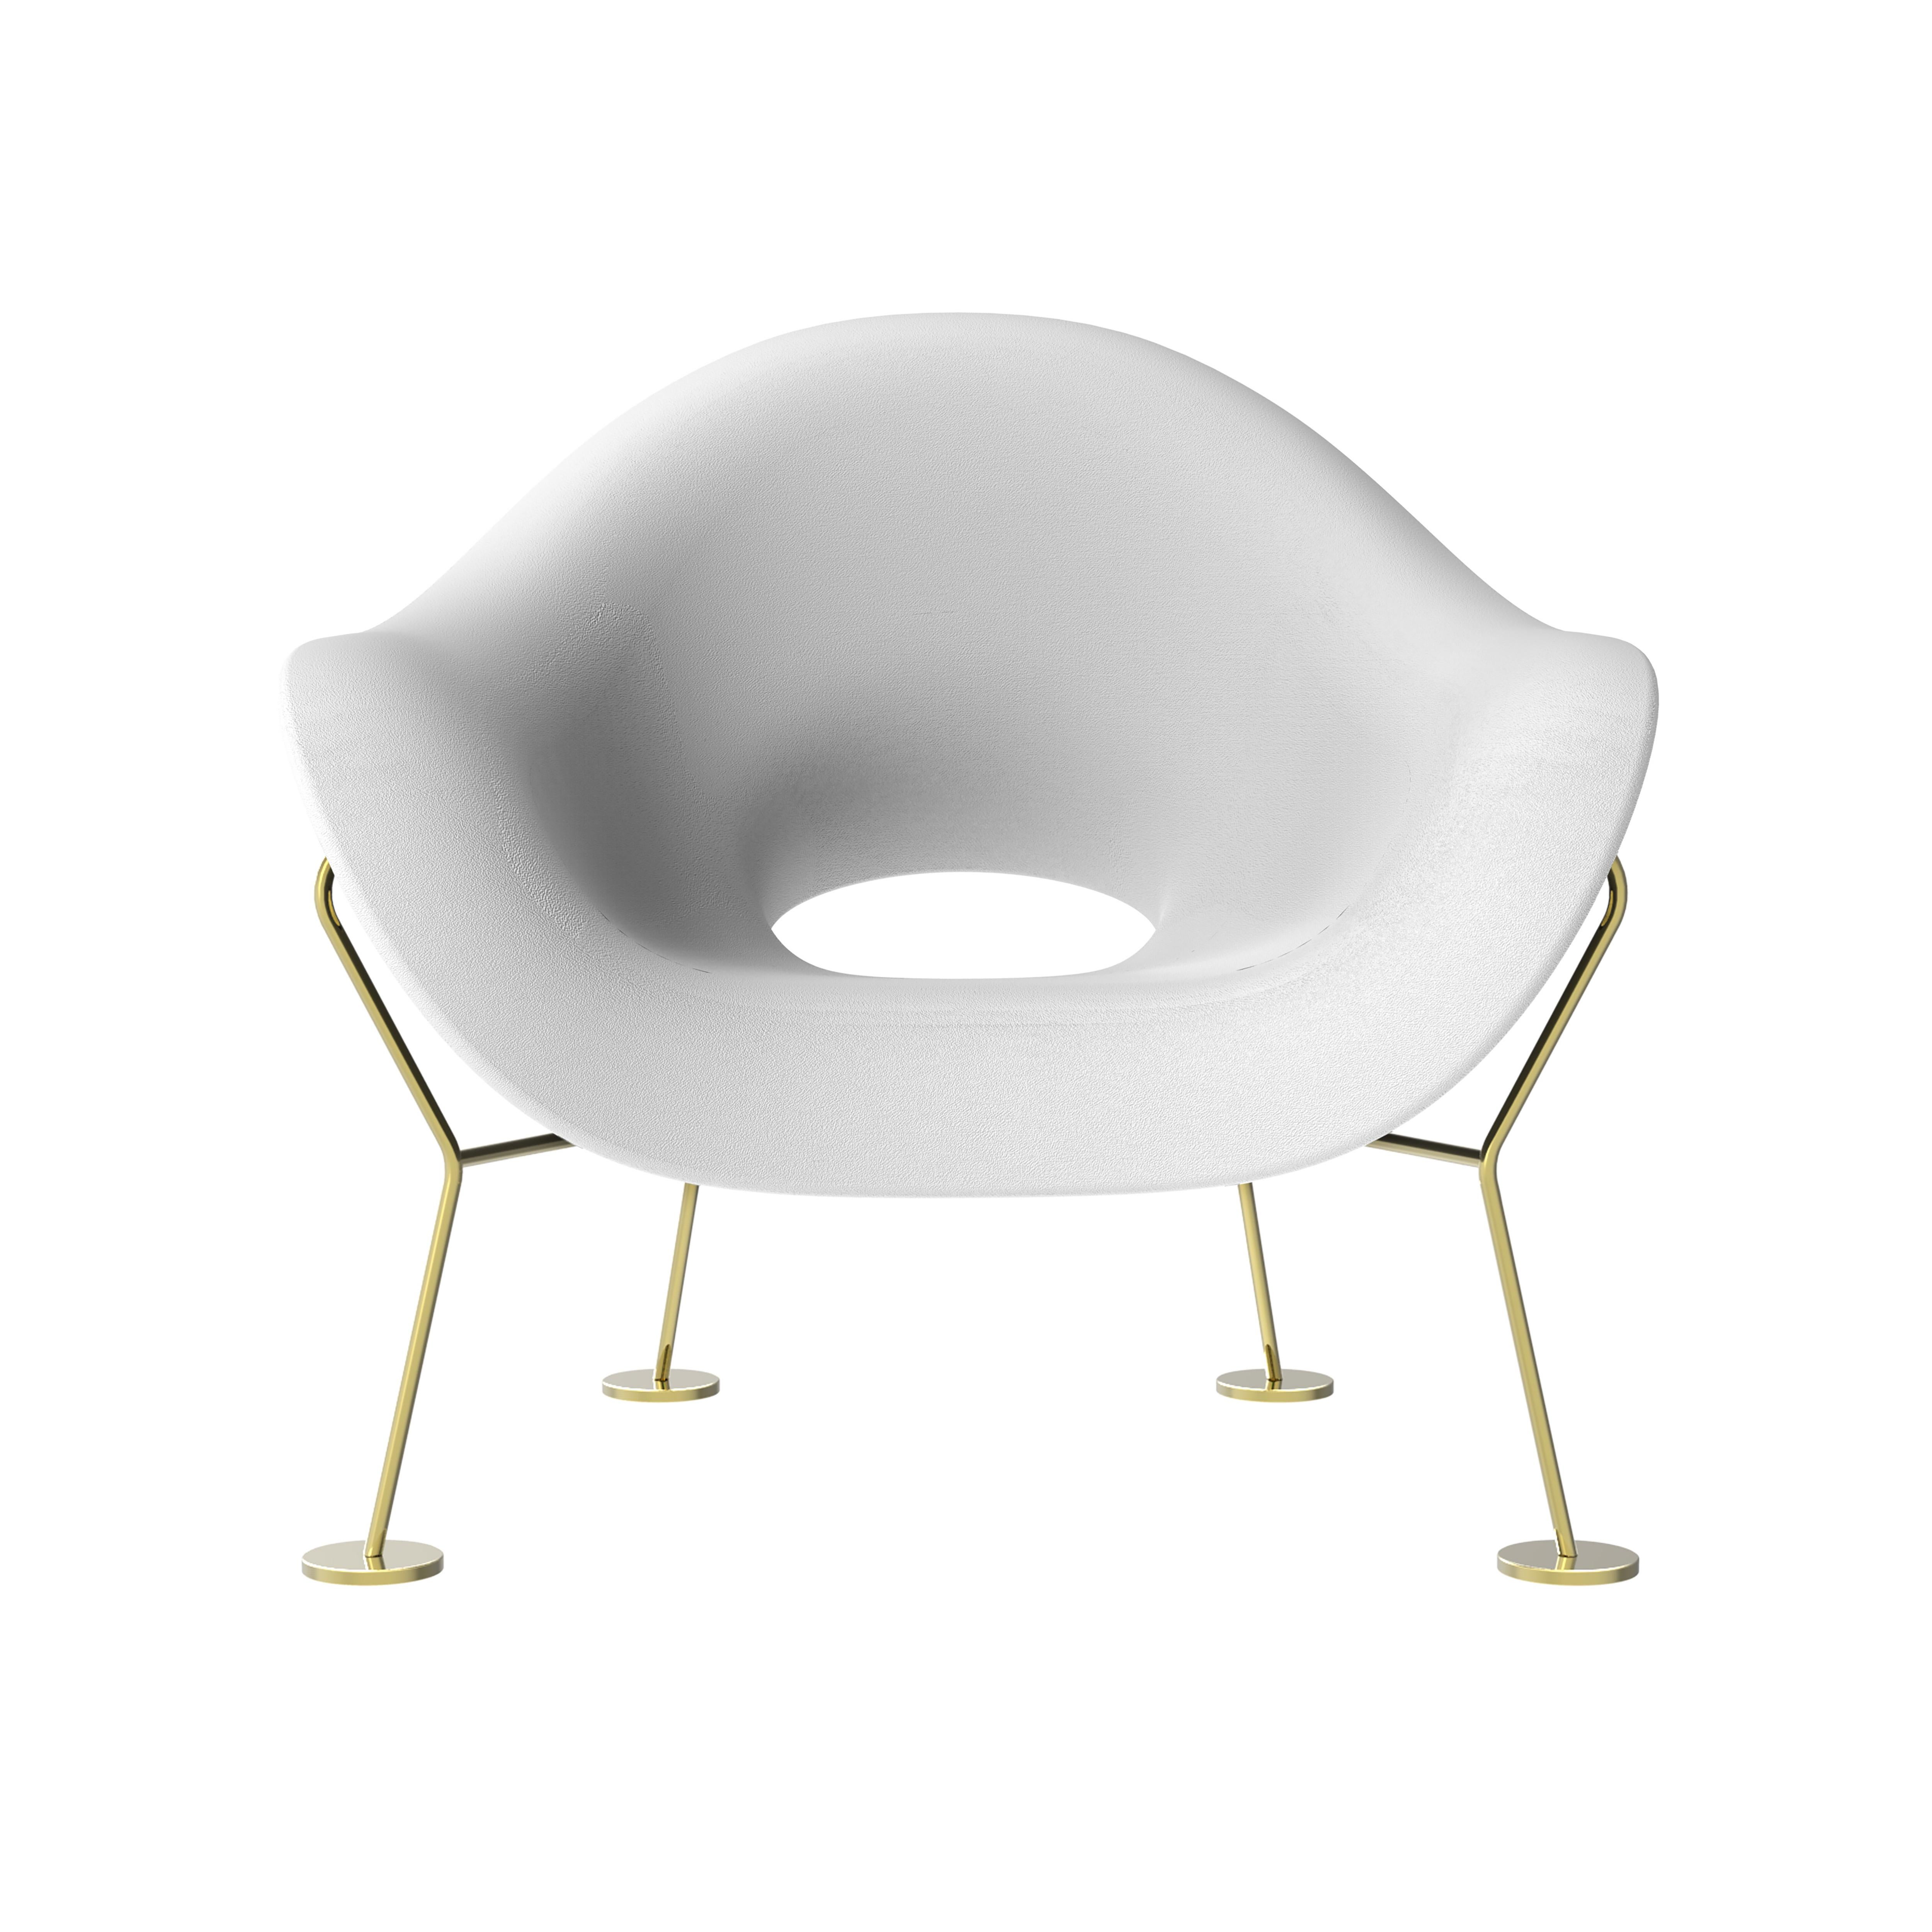 For Sale: White Modern Brass Armchair or Dining Chair in Black White Green or Pink